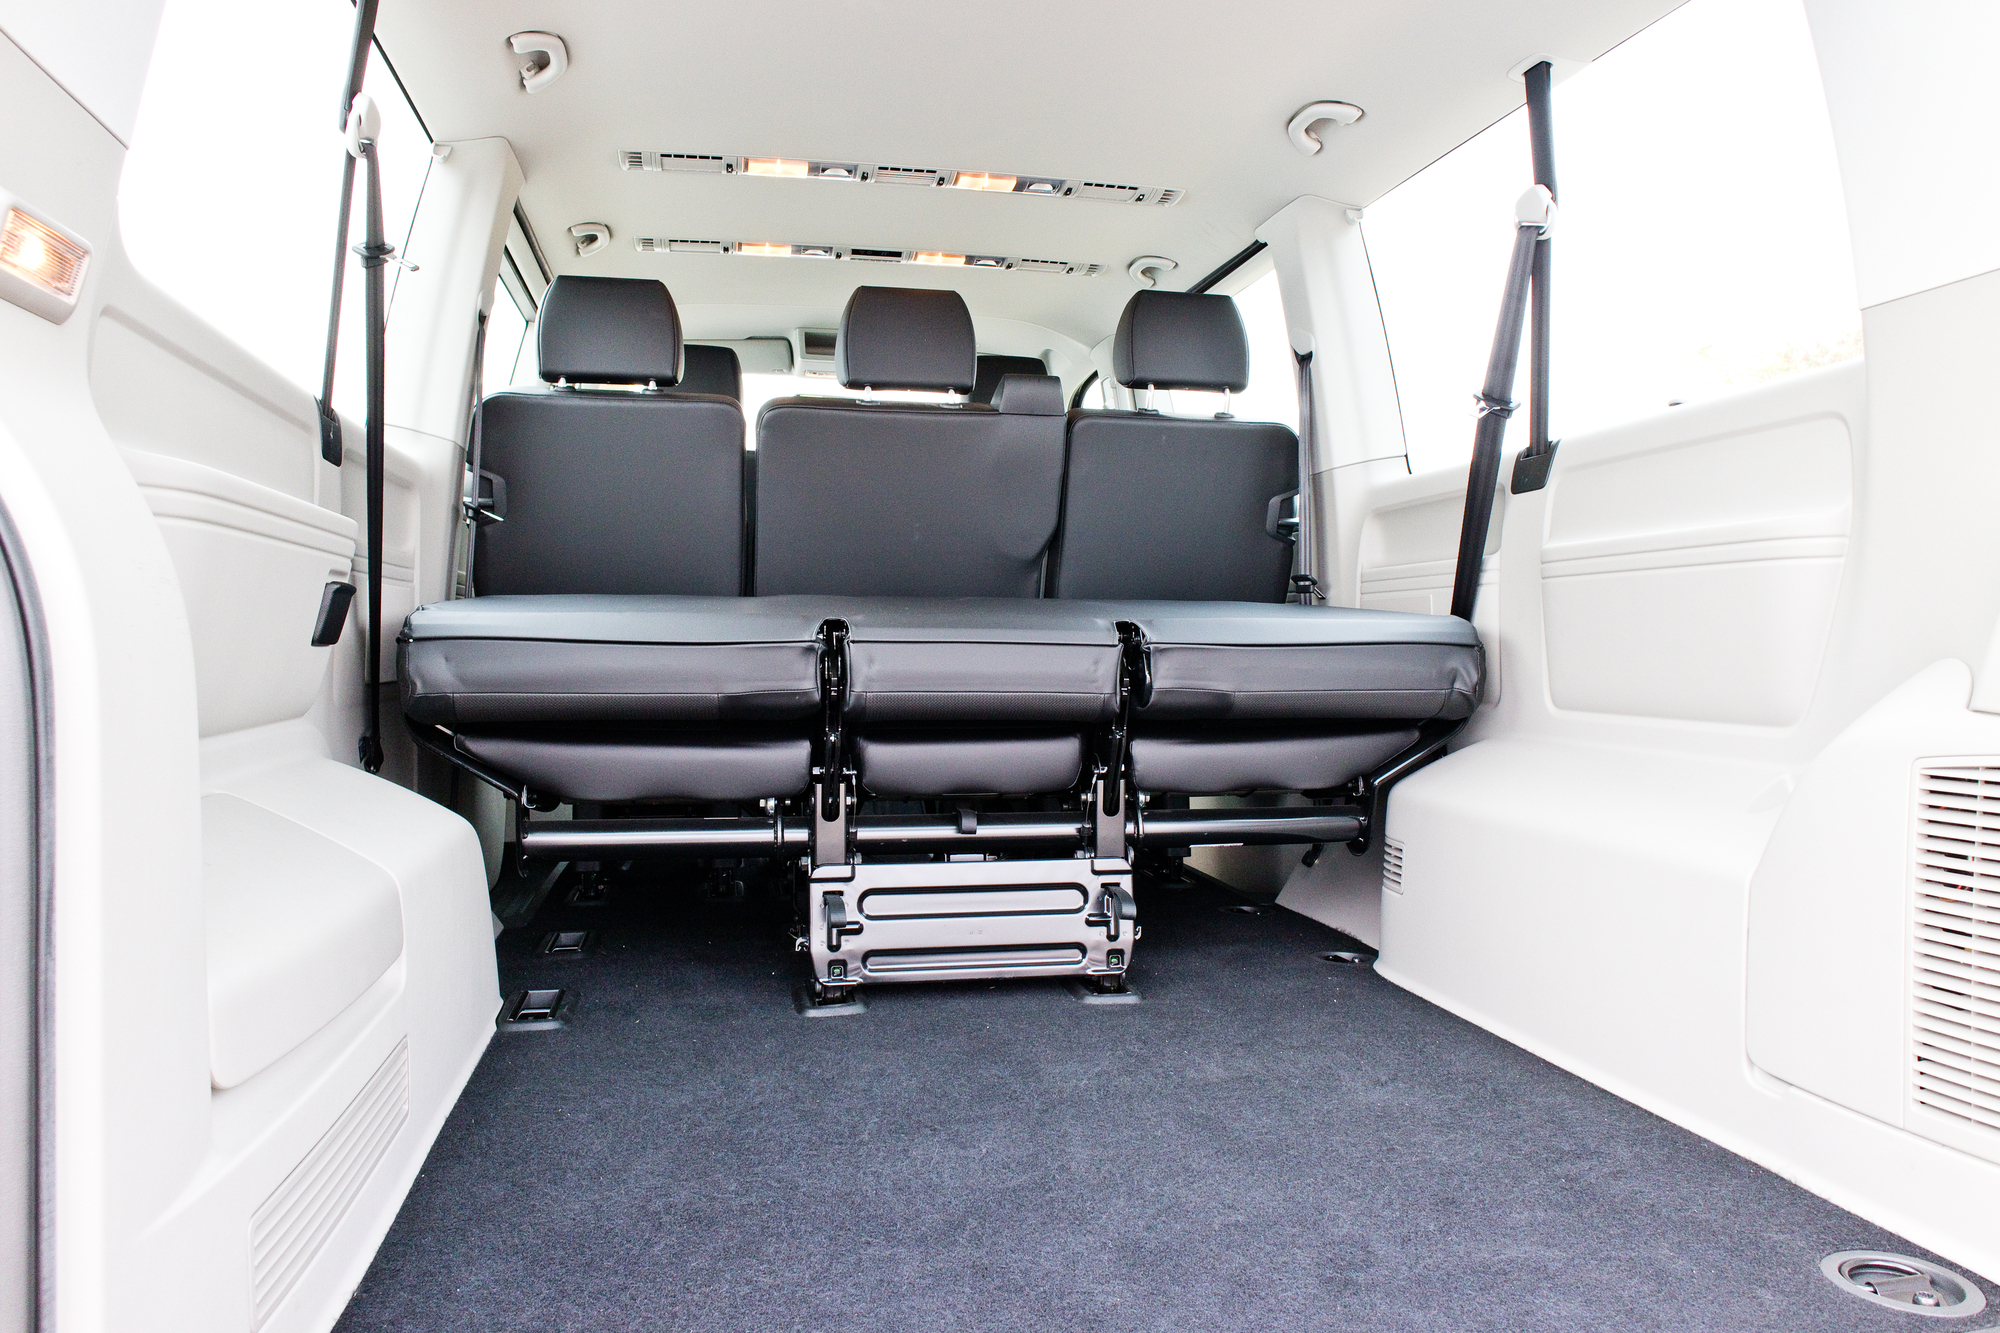 Volkswagen T6.1 California dimensions, boot space and similars